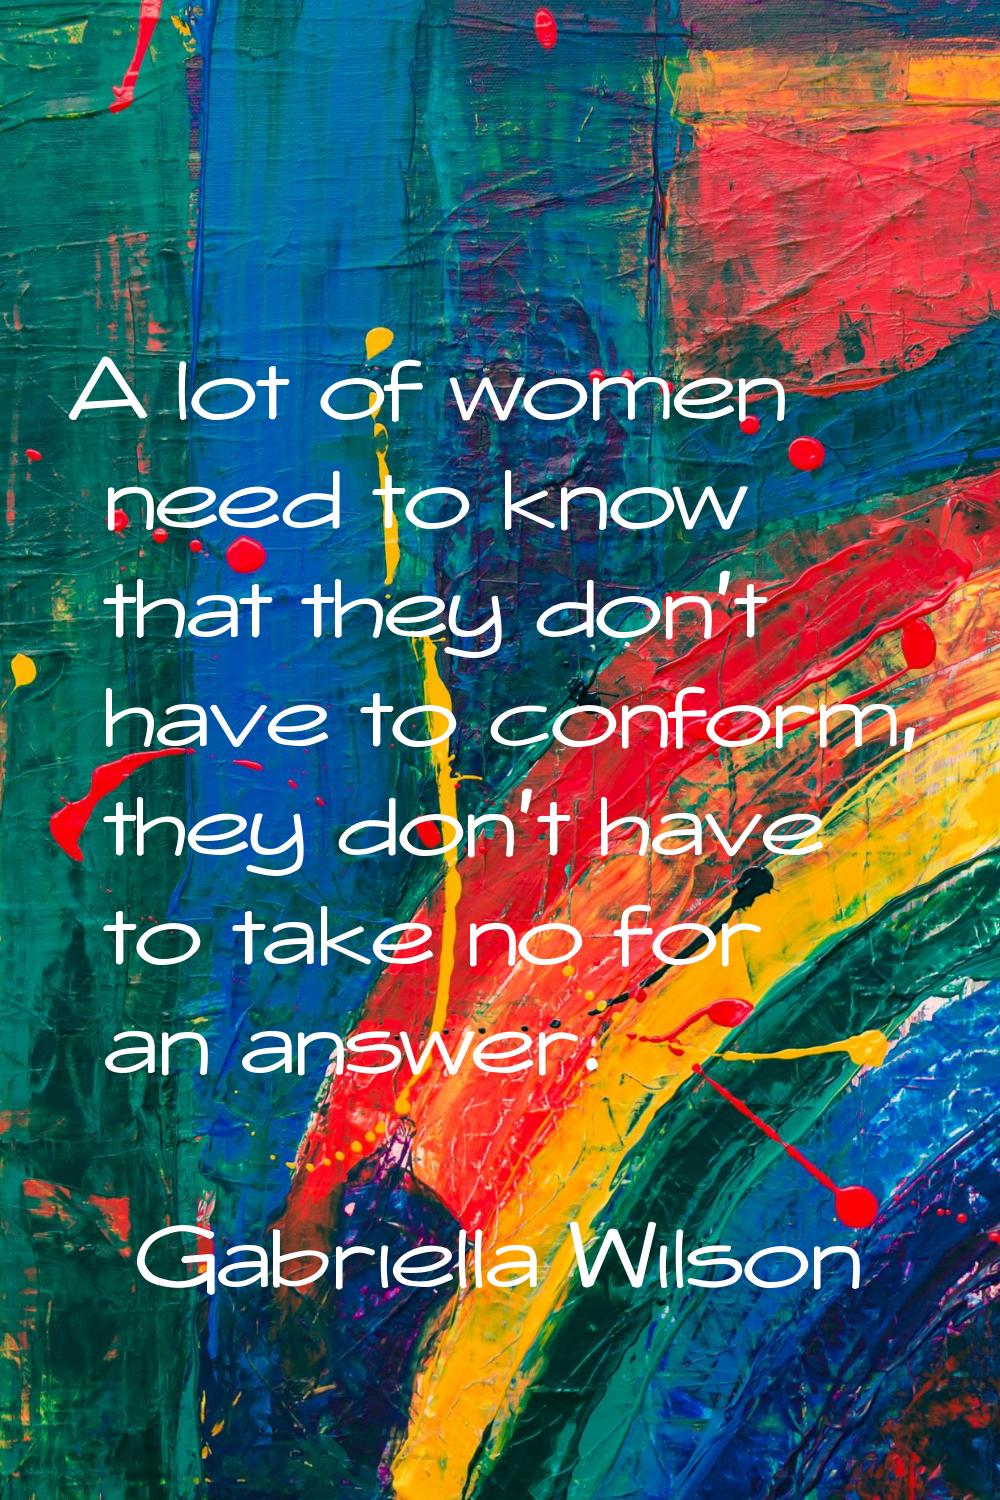 A lot of women need to know that they don't have to conform, they don't have to take no for an answ